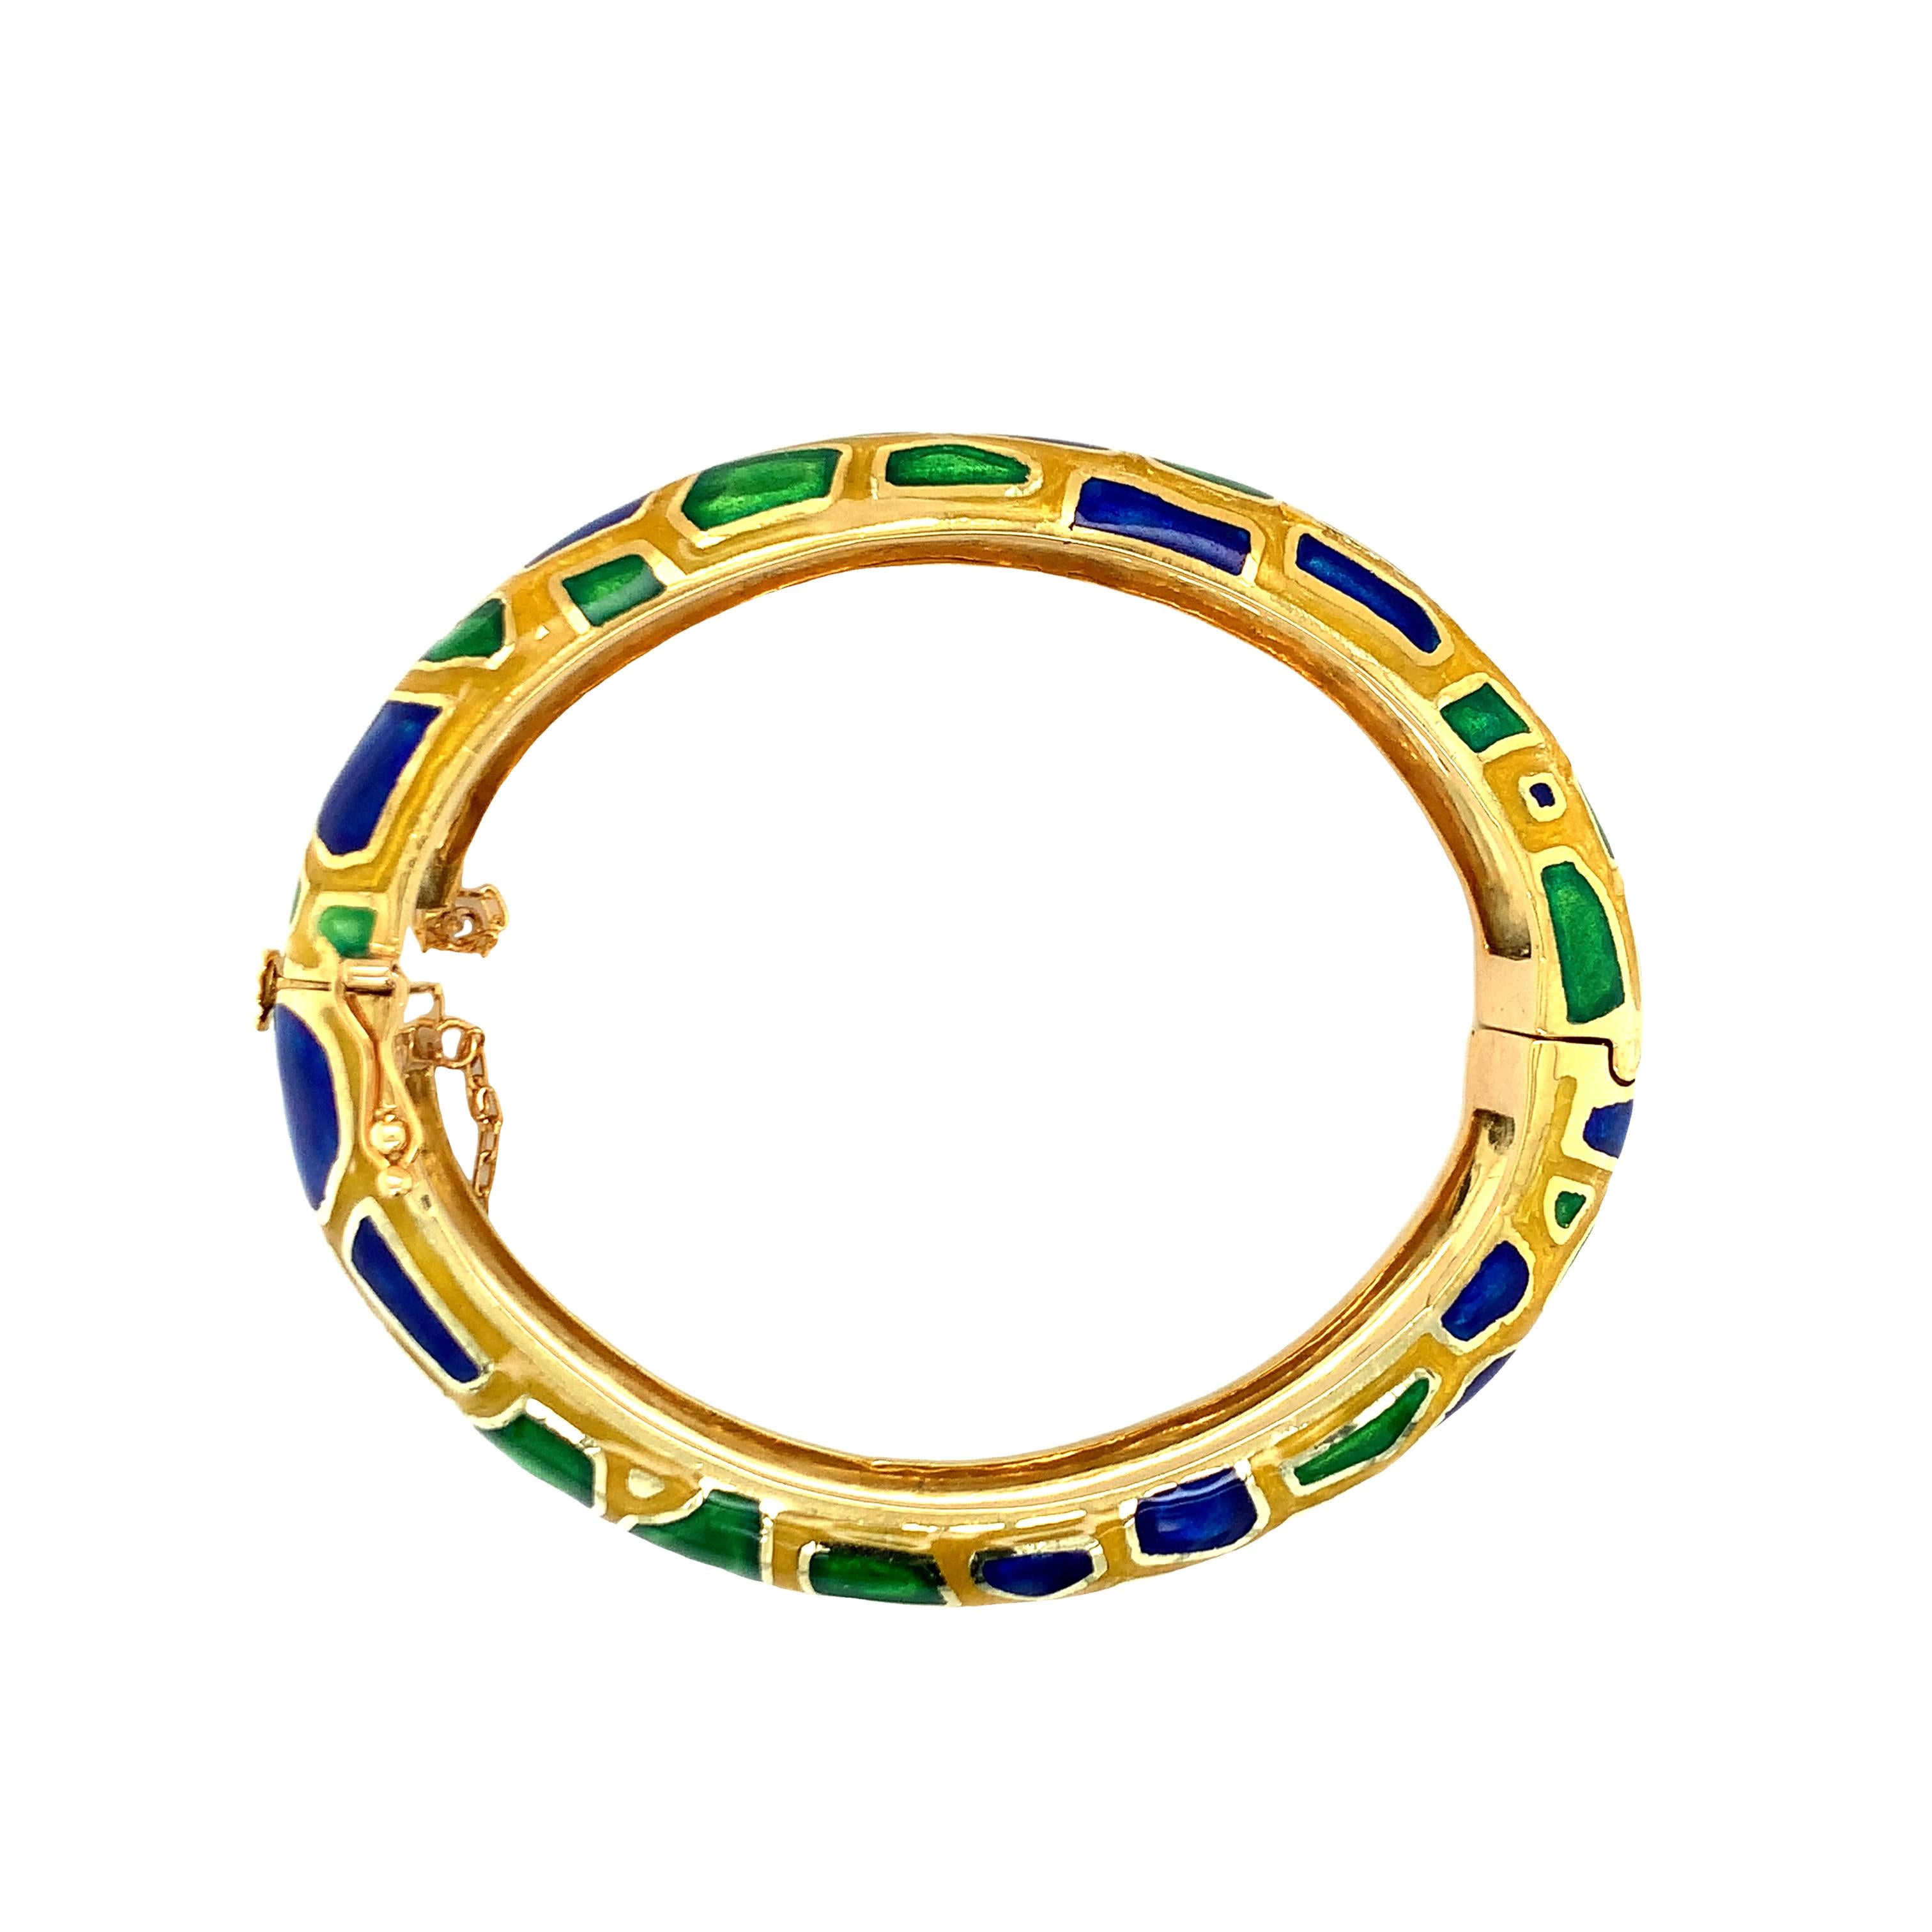 One 14K yellow gold blue, green, yellow enamel bangle bracelet measuring 15 millimeters wide and 8 millimeters high upon wrist when worn and weighs 82.5 grams. With matching ring available (R.LL.1).

Chic, bold, vibrant.

Metal: 14K Yellow